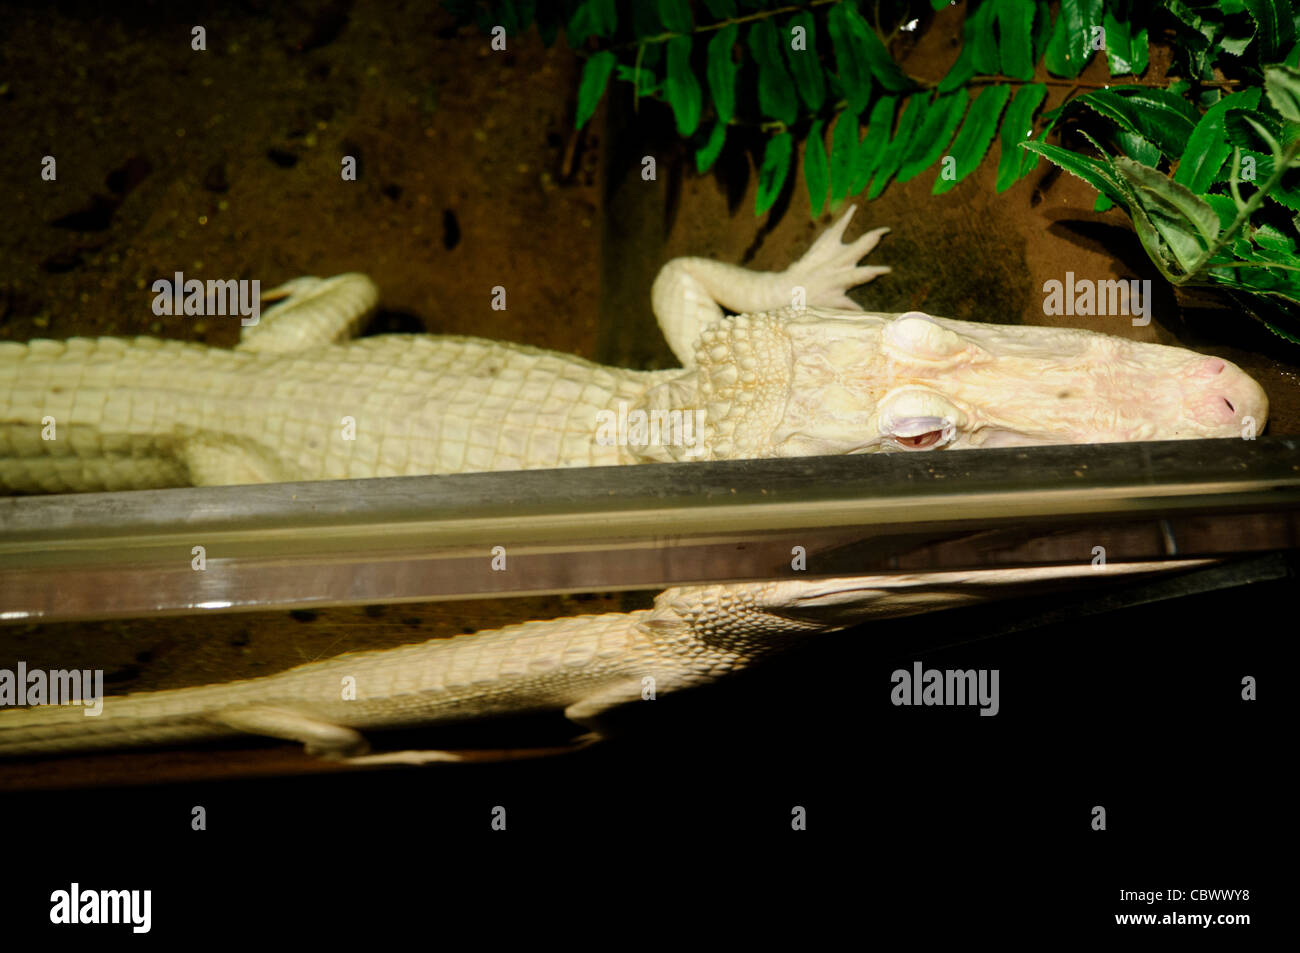 WASHINGTON DC, USA - A rare albino alligator named Oleander on display at the National Aquarium in downtown Washington DC in late-2011 as part of the Secrets of the Swamp special exhibit. The National Aquarium is in the basement of the Department of Commerce Building, where it has been housed since 1932. Much smaller and less well known than its affiliated facility in Baltimore, Washington's National Aquarium consists of a series of tanks illustrated various types of marine environments, with special emphasis on the many marine sanctuaries in U.S. marine territory. NB: The aquarium closed in 2 Stock Photo